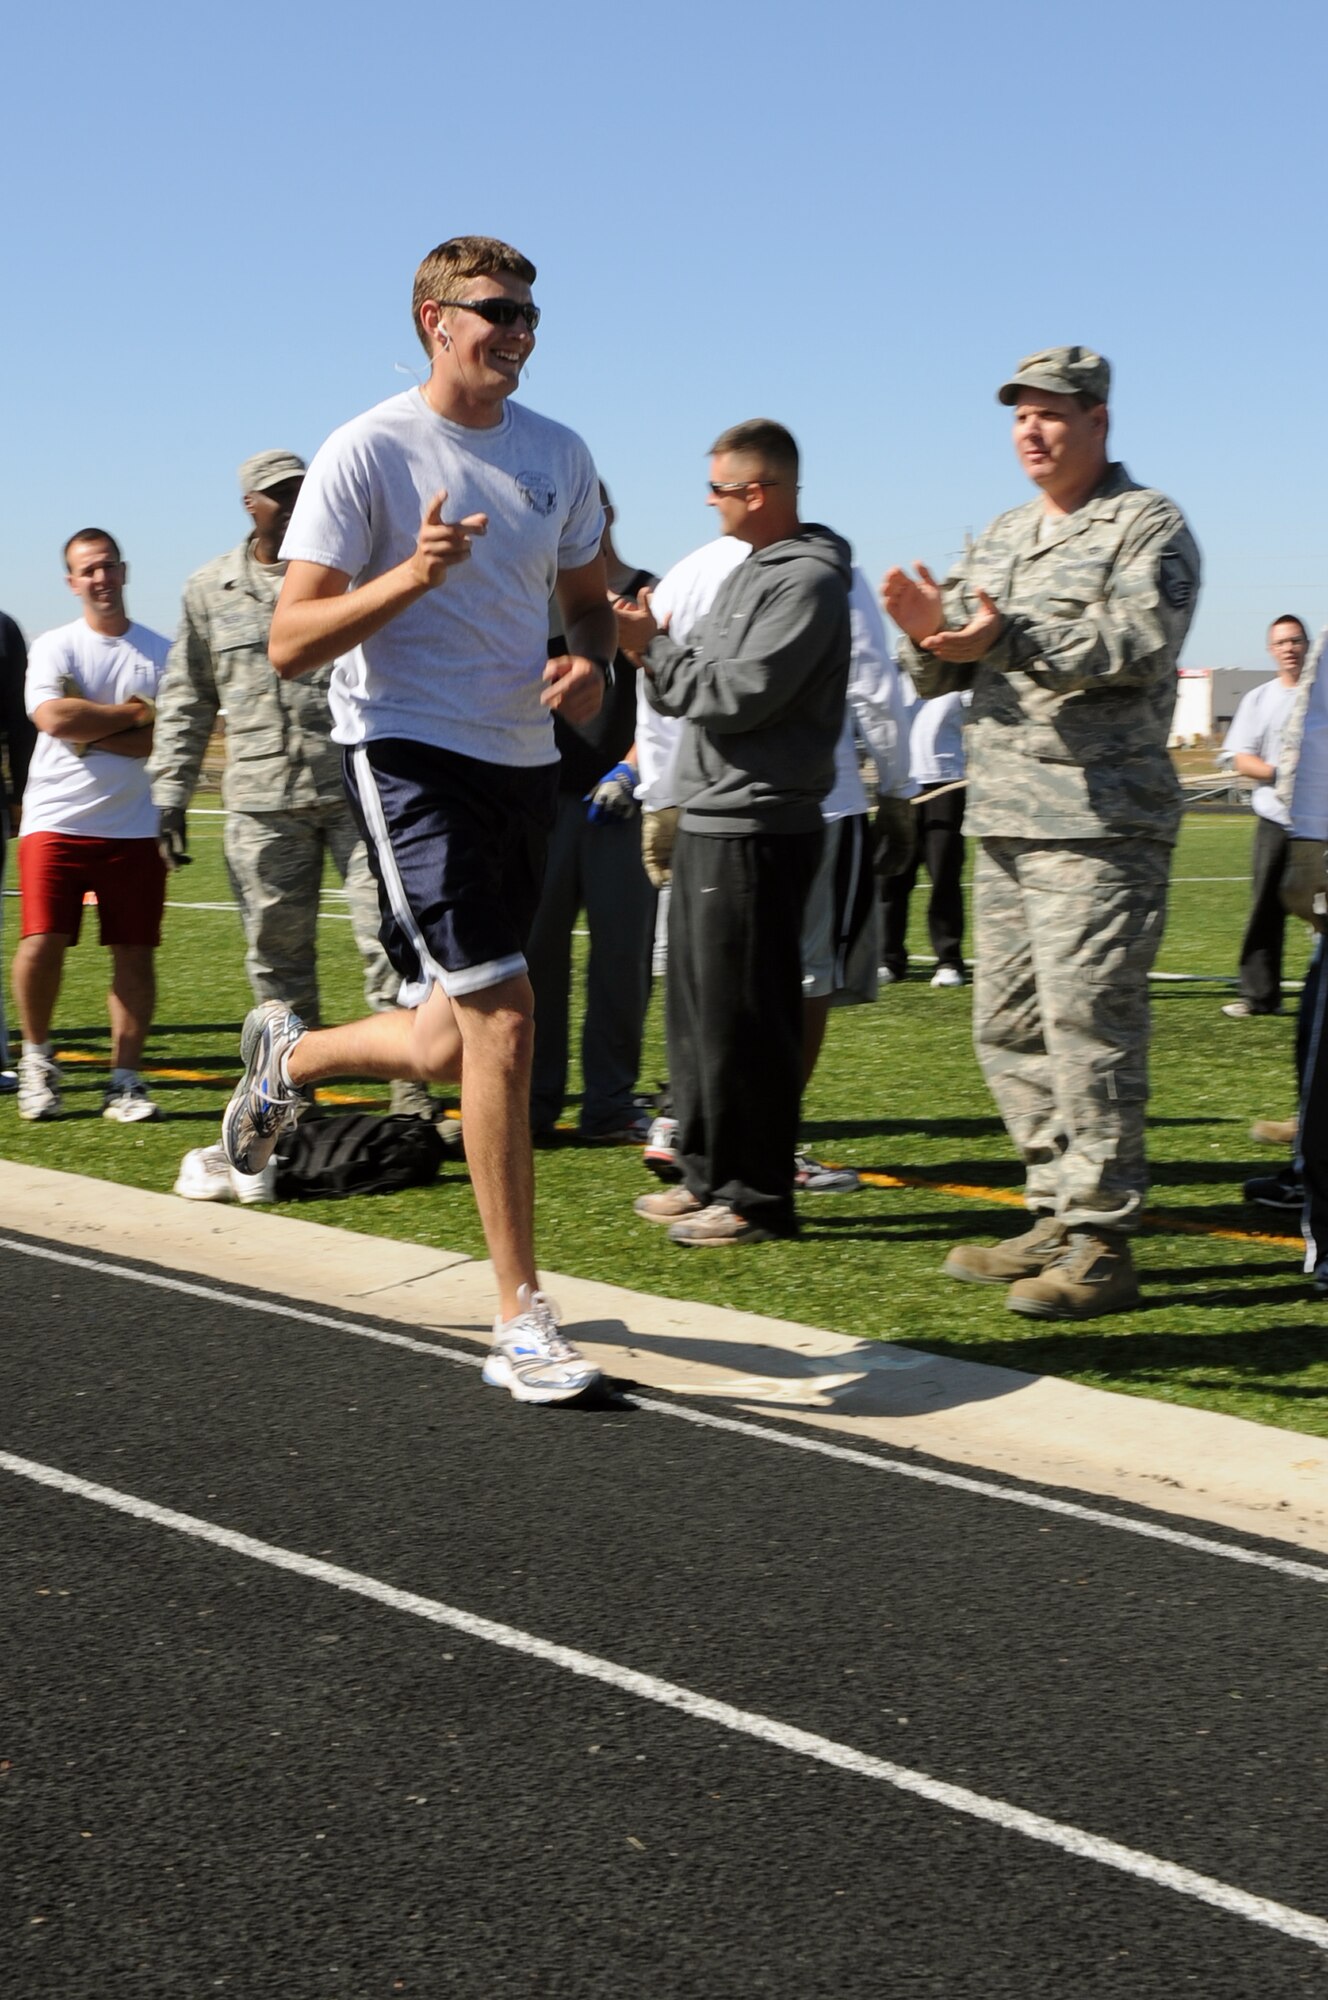 Buckley Air Force Base, Colo. – Brian Powell, 460th Contracting Squadron, crosses the finish line in 1st place in the 5K run during Buckley’s Sports and Field Day Oct. 2. (U. S. Air Force photo by Senior Airman John Easterling)